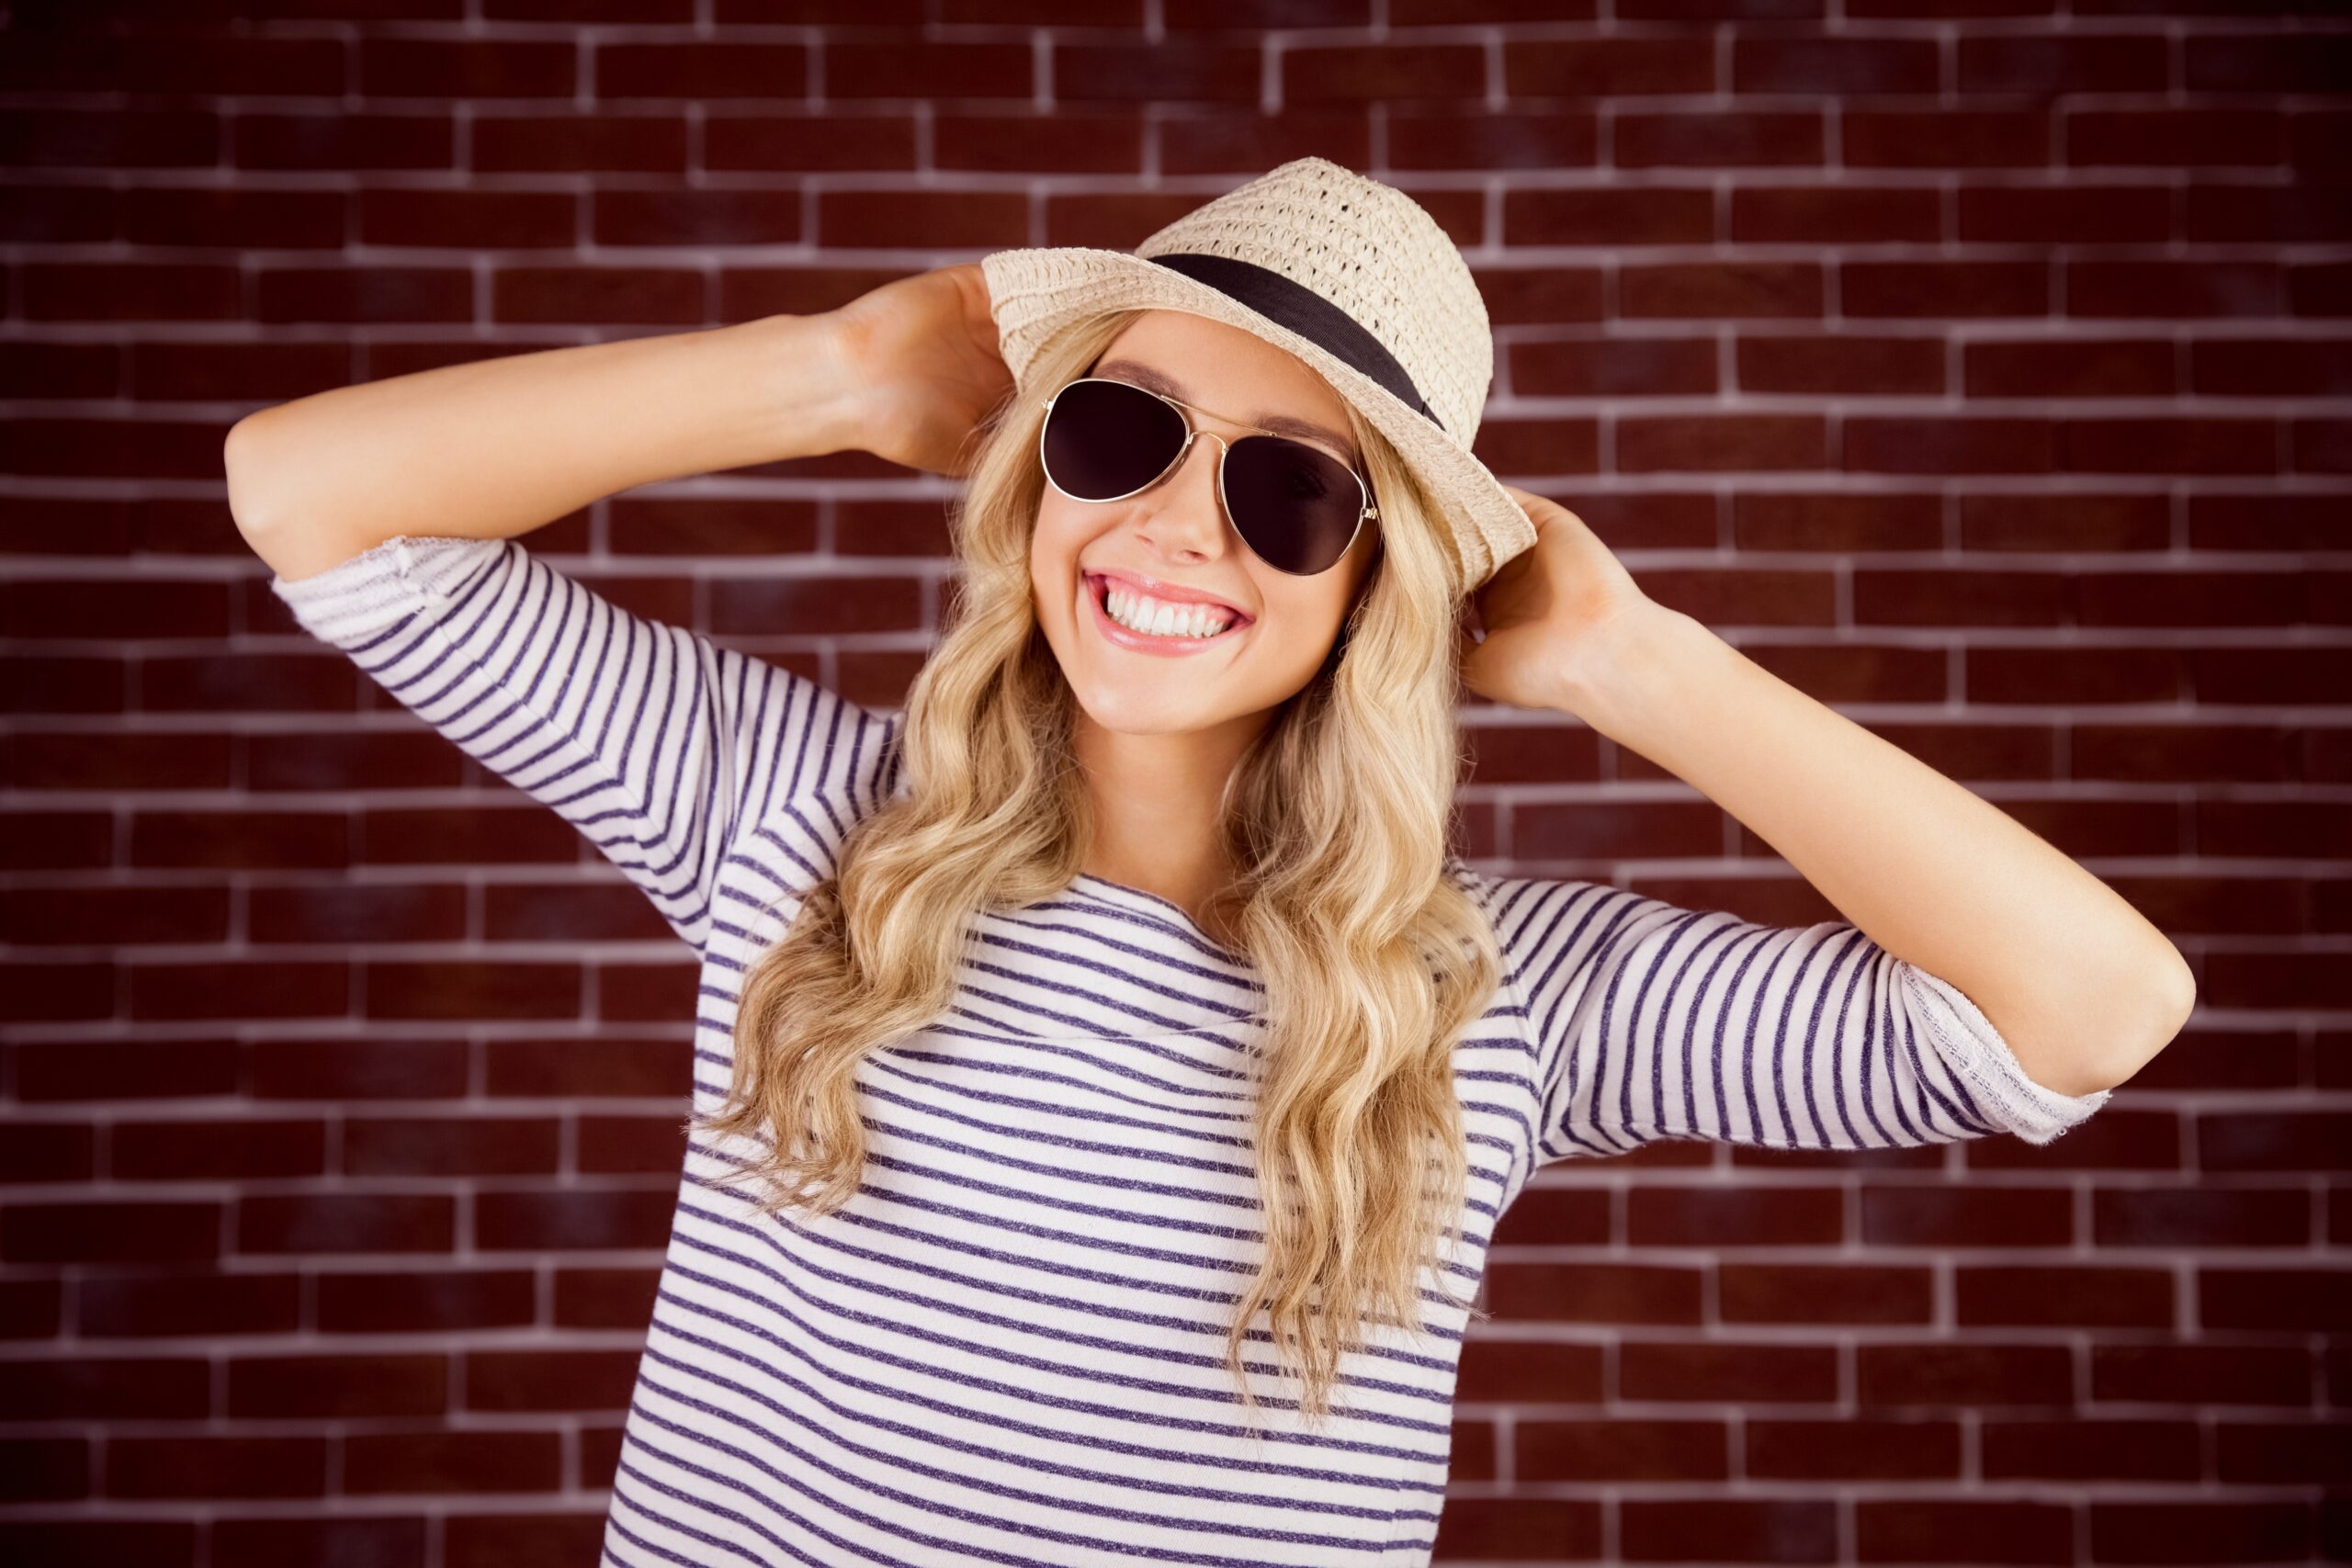 Smiling blond woman wearing a striped shirt